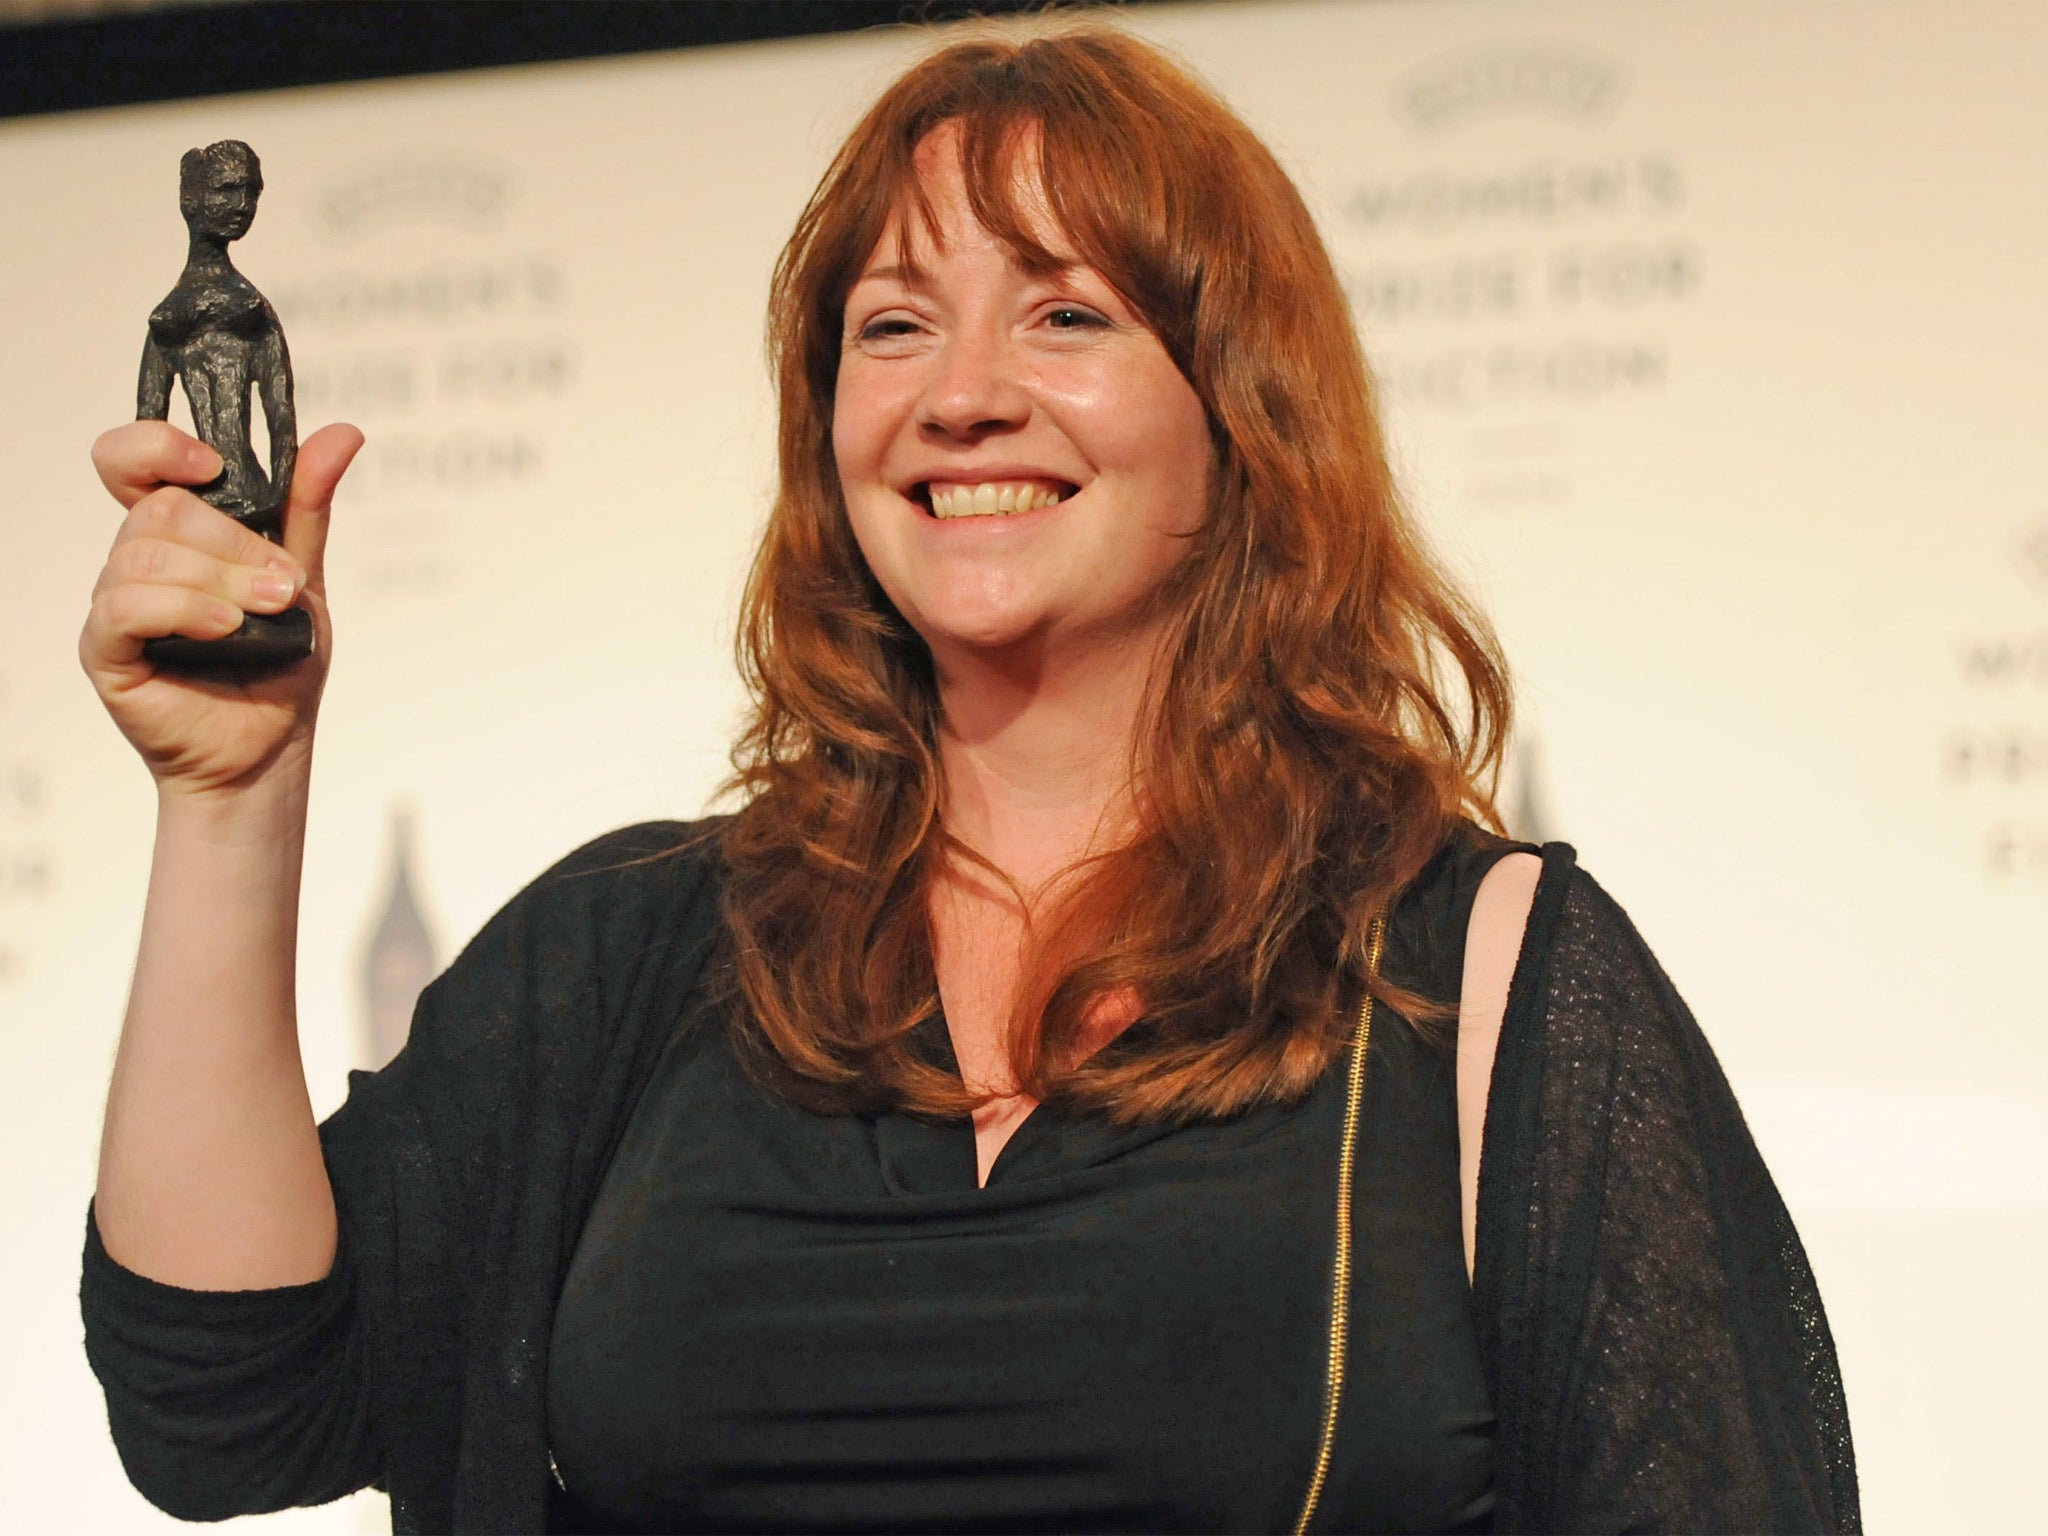 Eimear McBride, author of ‘A Girl is a Half-Formed Thing’, celebrates winning the 2014 Baileys Women's Prize for Fiction last month